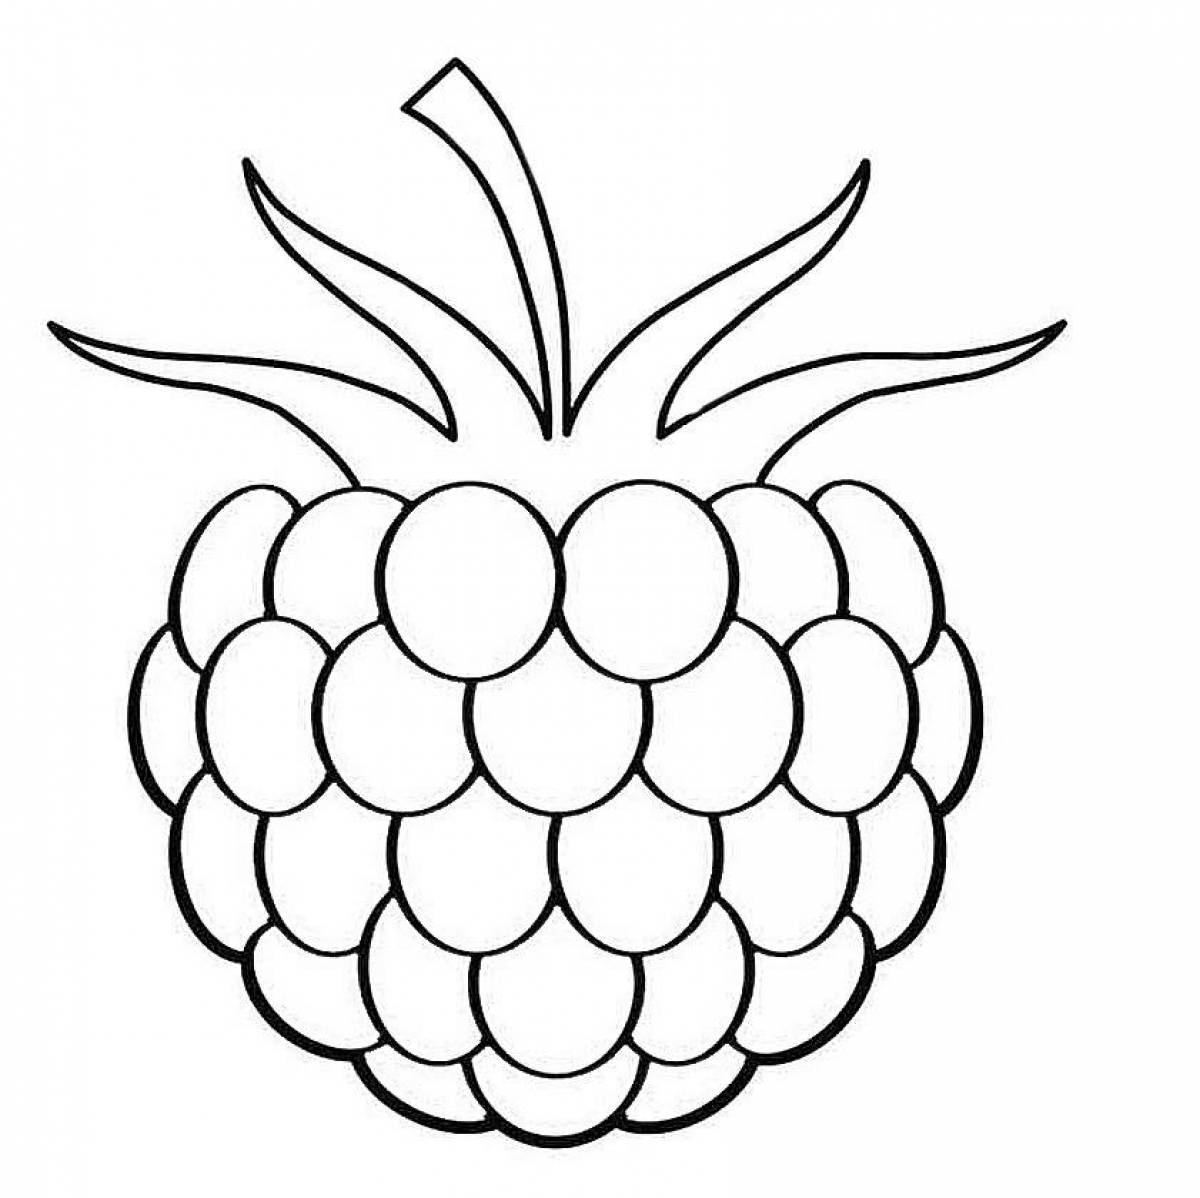 Playful vegetable and fruit coloring page